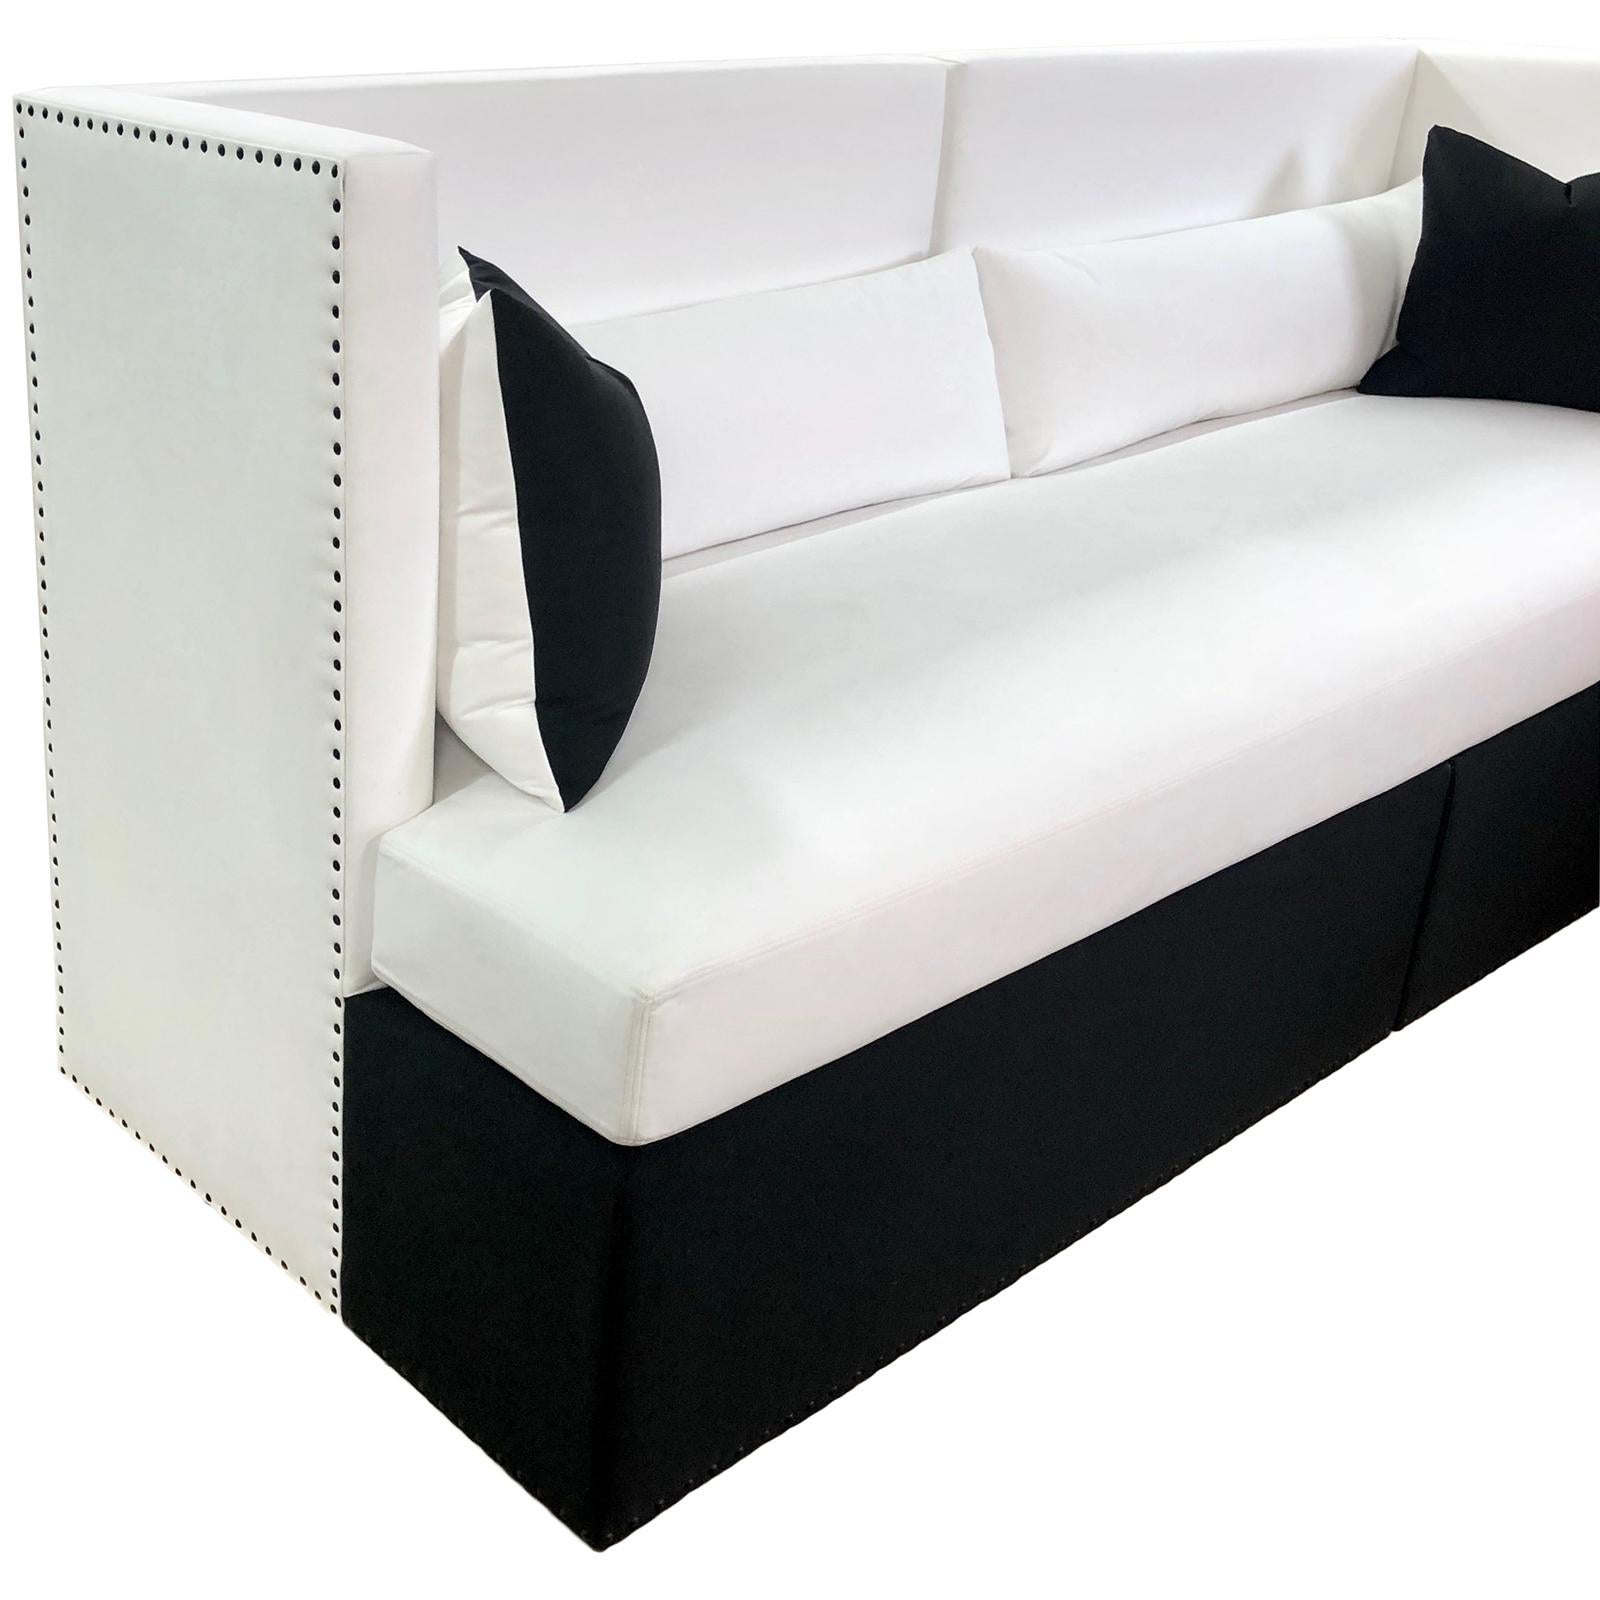 The Alonso sofa is the most versatile couch ever. A great addition to any Living Room, Foyer or even as a Dining Banquette. Additional sizes available (1' increments), Fully customizable upon request.